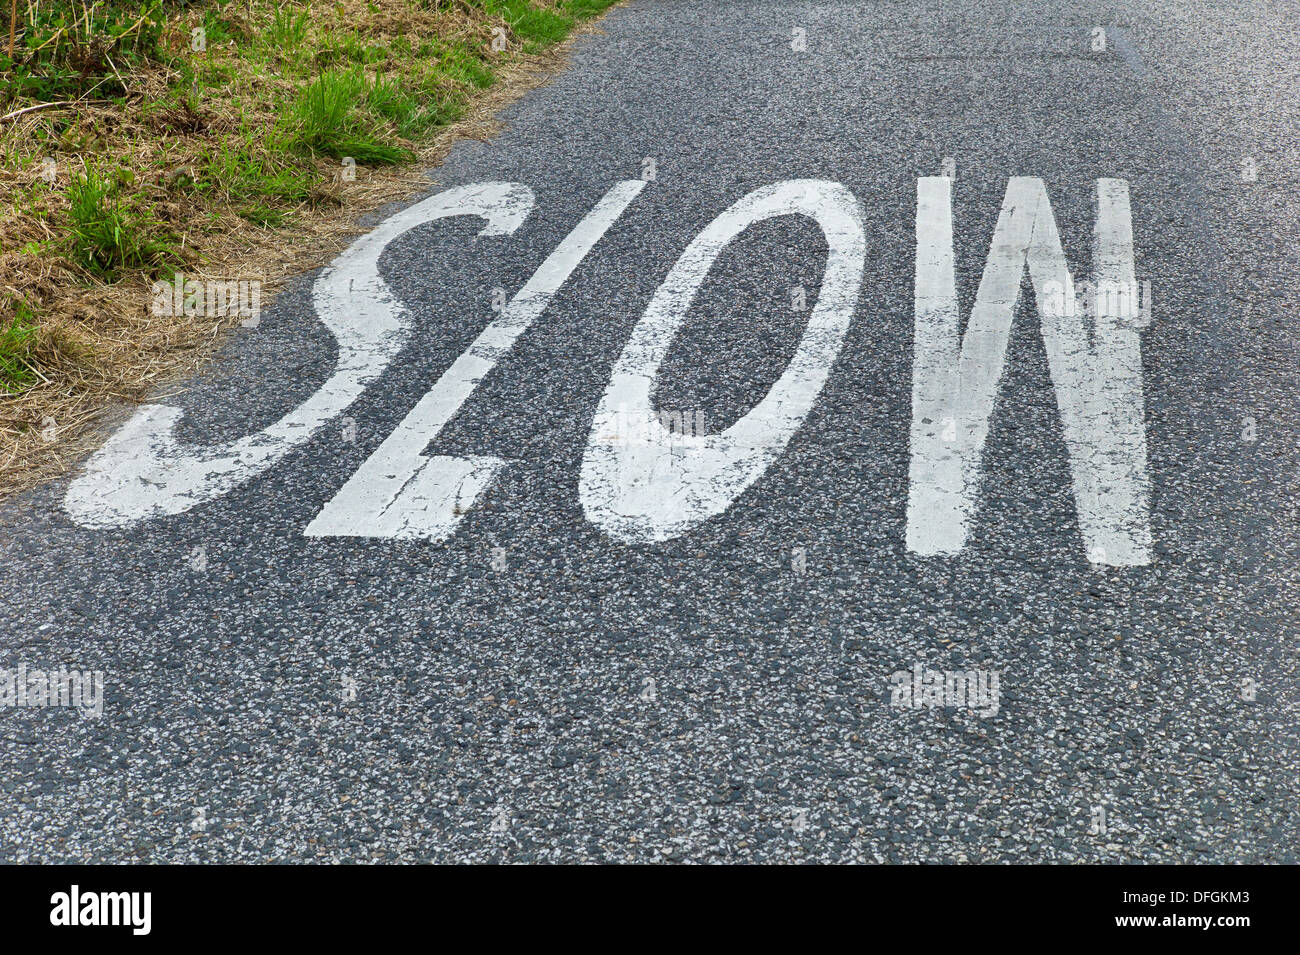 Slow sign on bend in road, Cornwall UK Credit: David Levenson Stock Photo